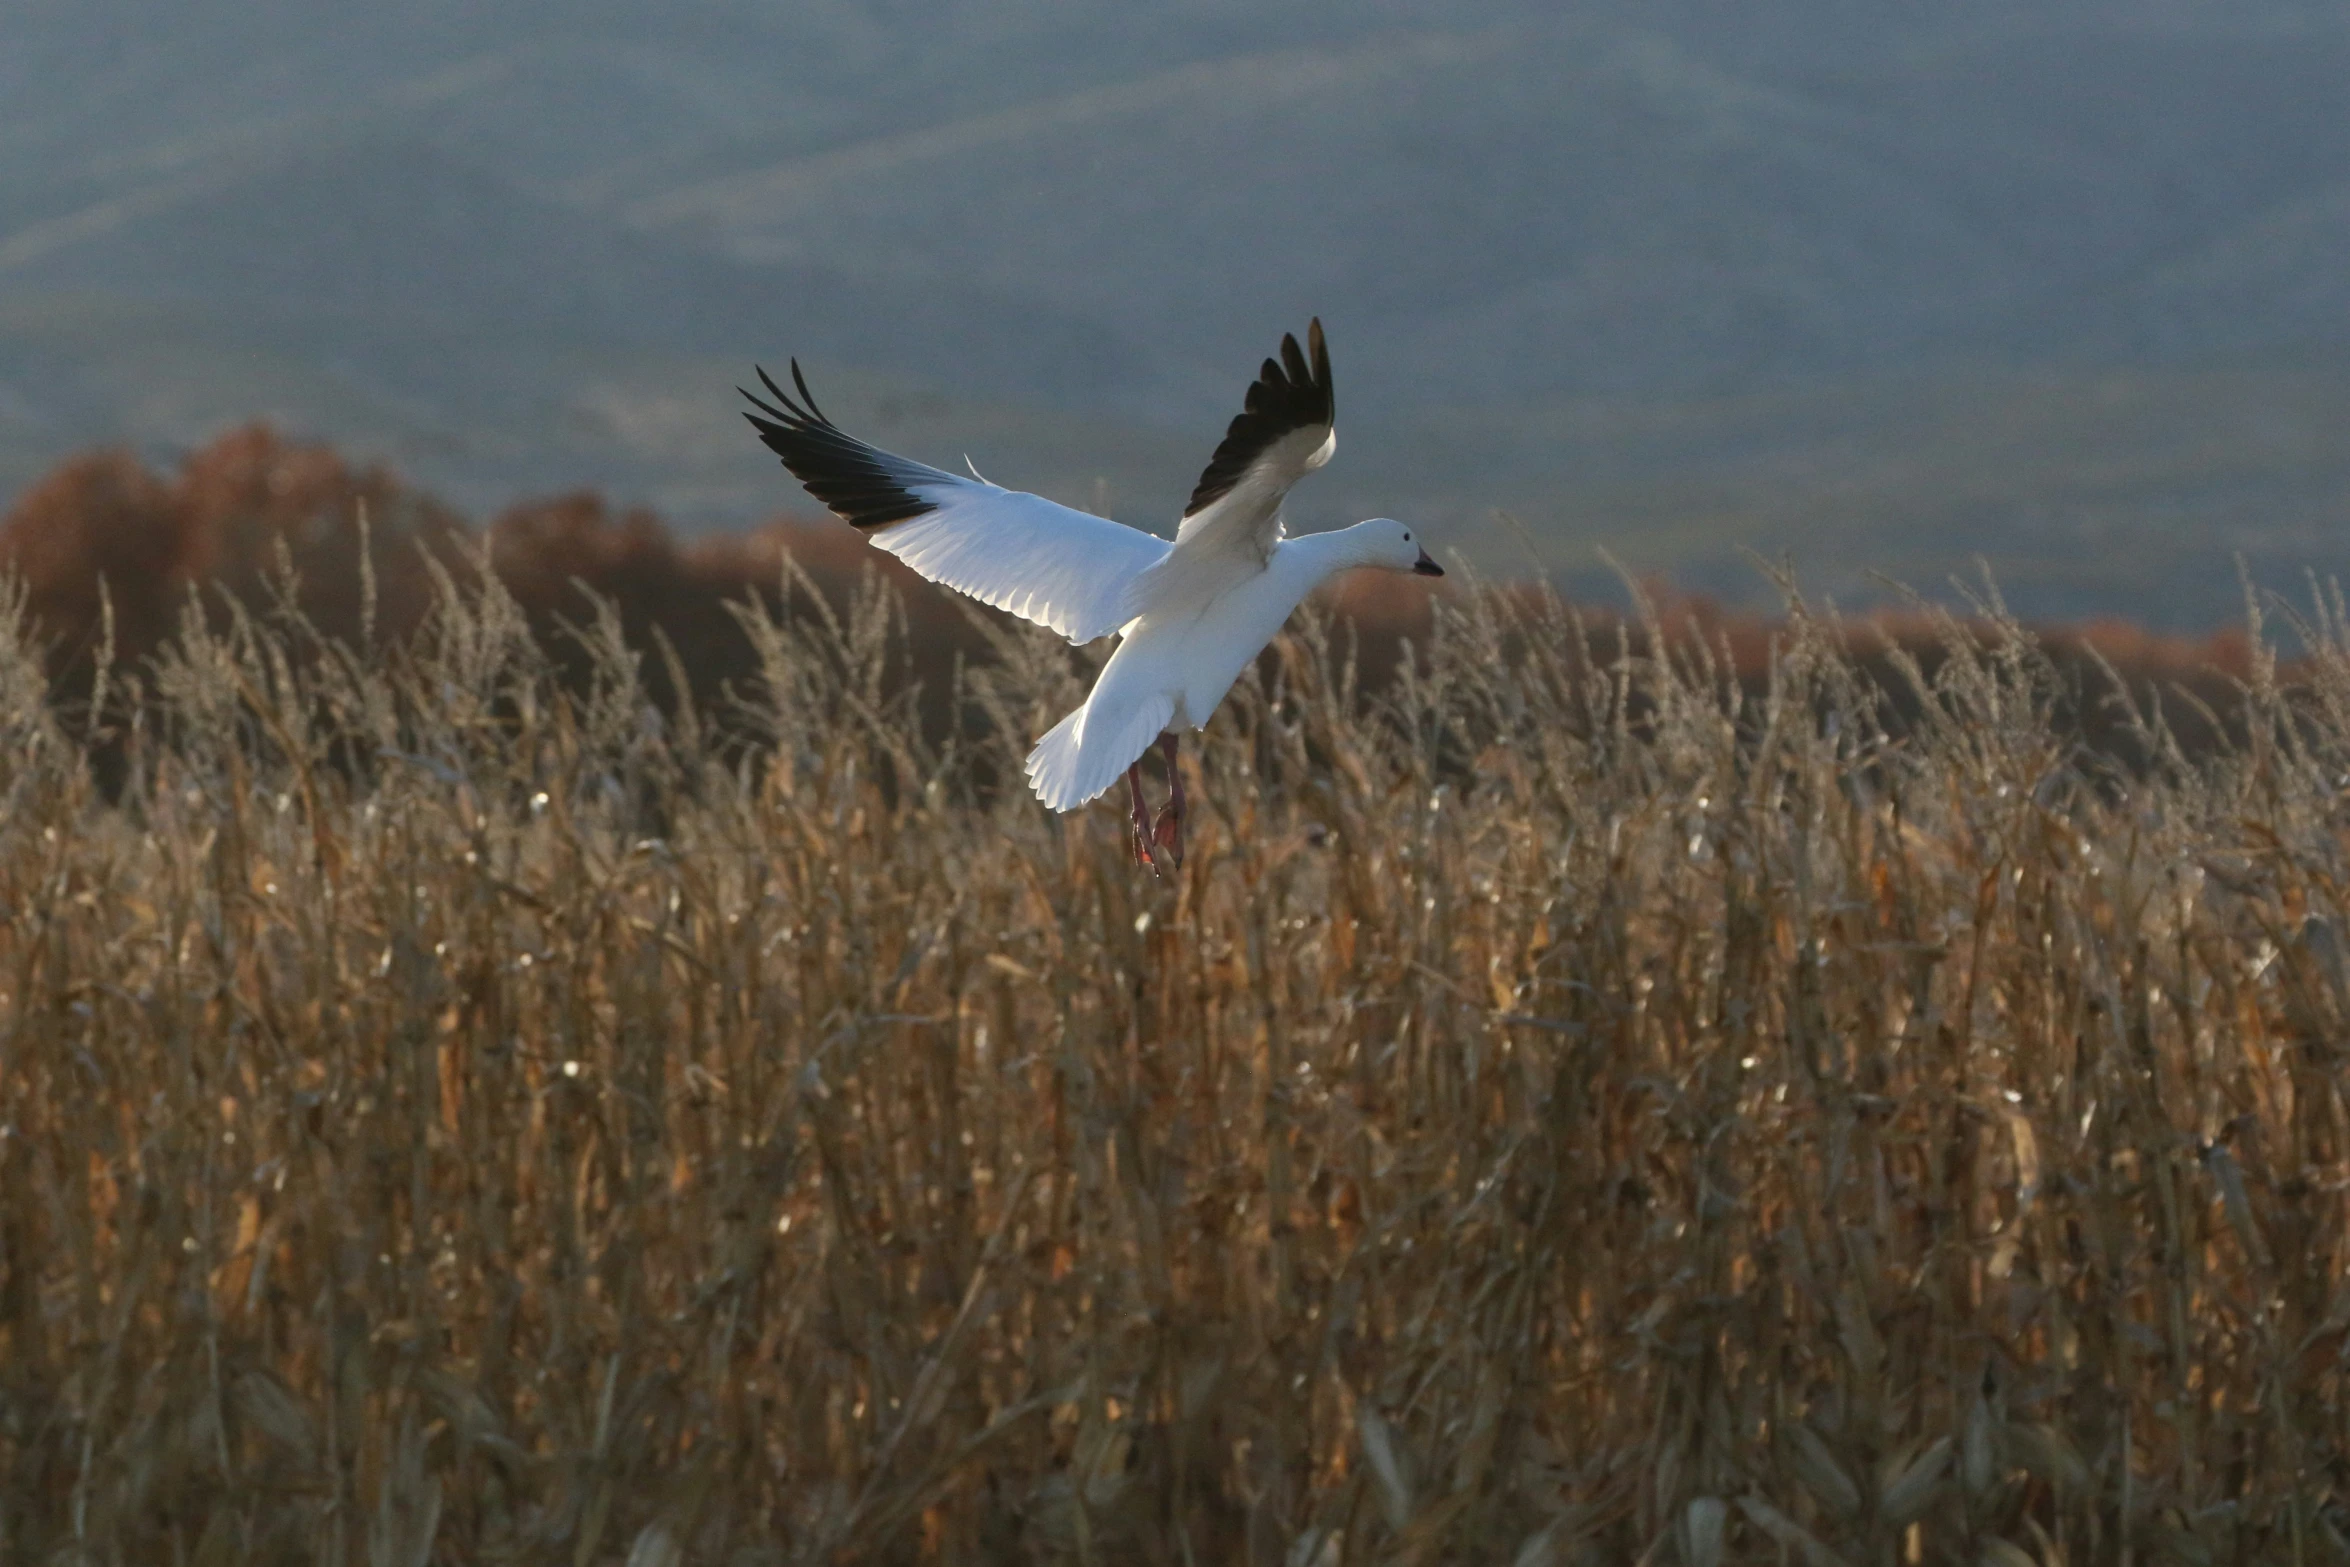 a bird flying over a field with dry grass